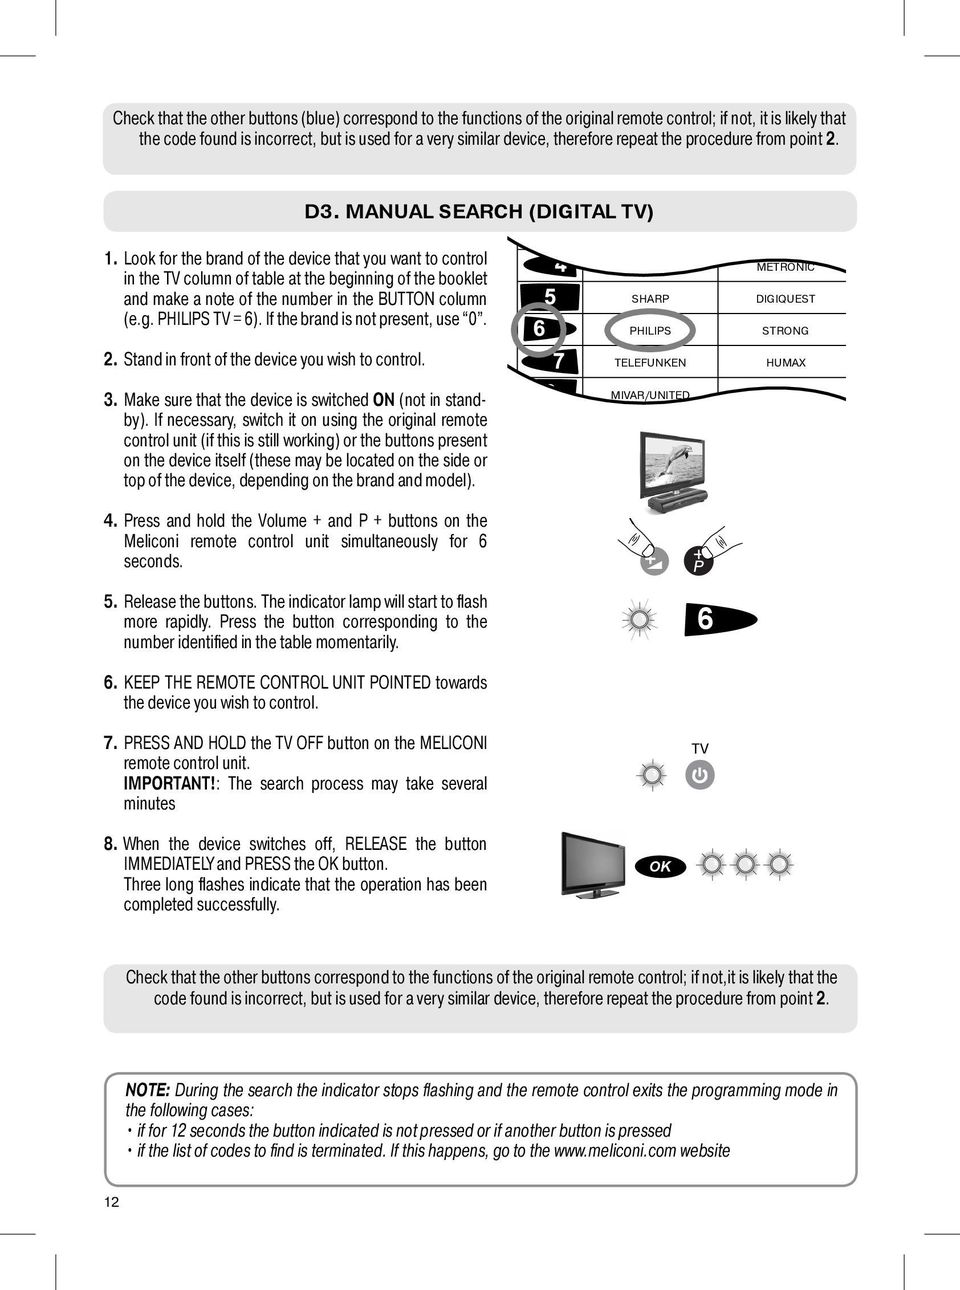 Look for the brand of the device that you want to control in the TV column of table at the beginning of the booklet and make a note of the number in the BUTTON column (e.g. PHILIPS TV = 6).